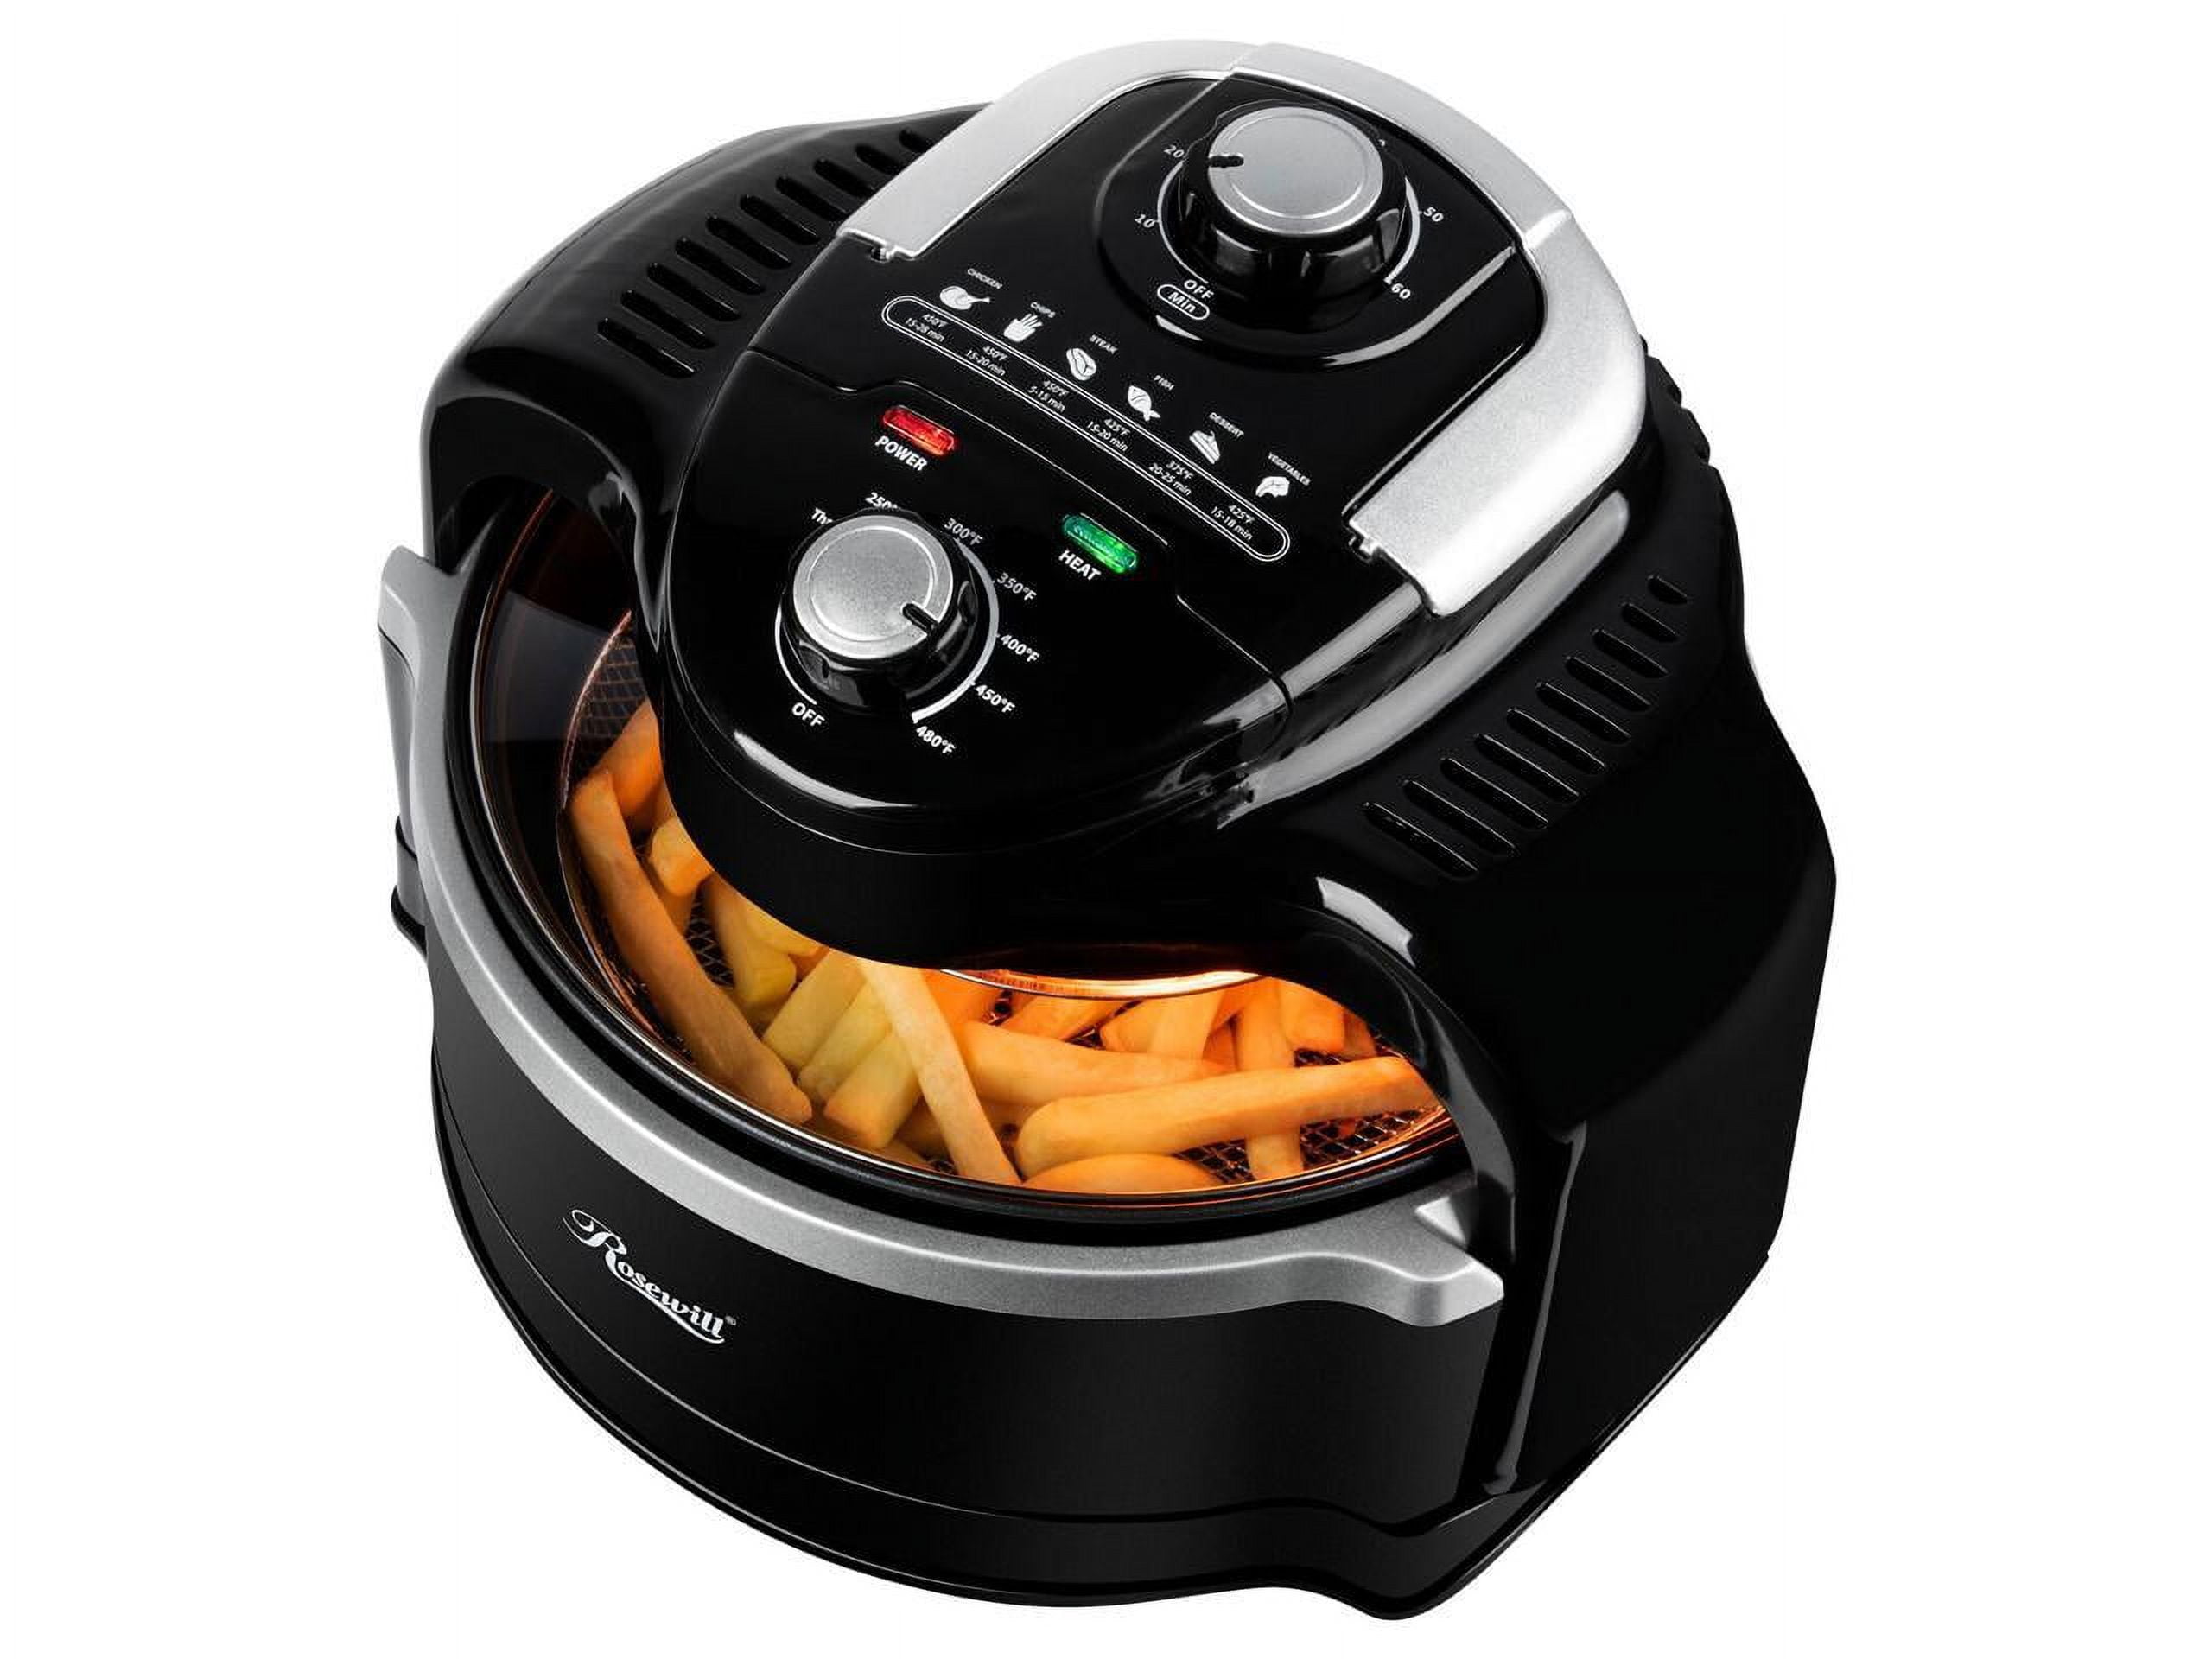 Besile Air Fryer 7.0 Quart Large Capacity 3-5 People Use,Oilless  Cooking,Digital Touchscreen, Rotary knob,Large Non-Stick Fryer Basket, Easy  to